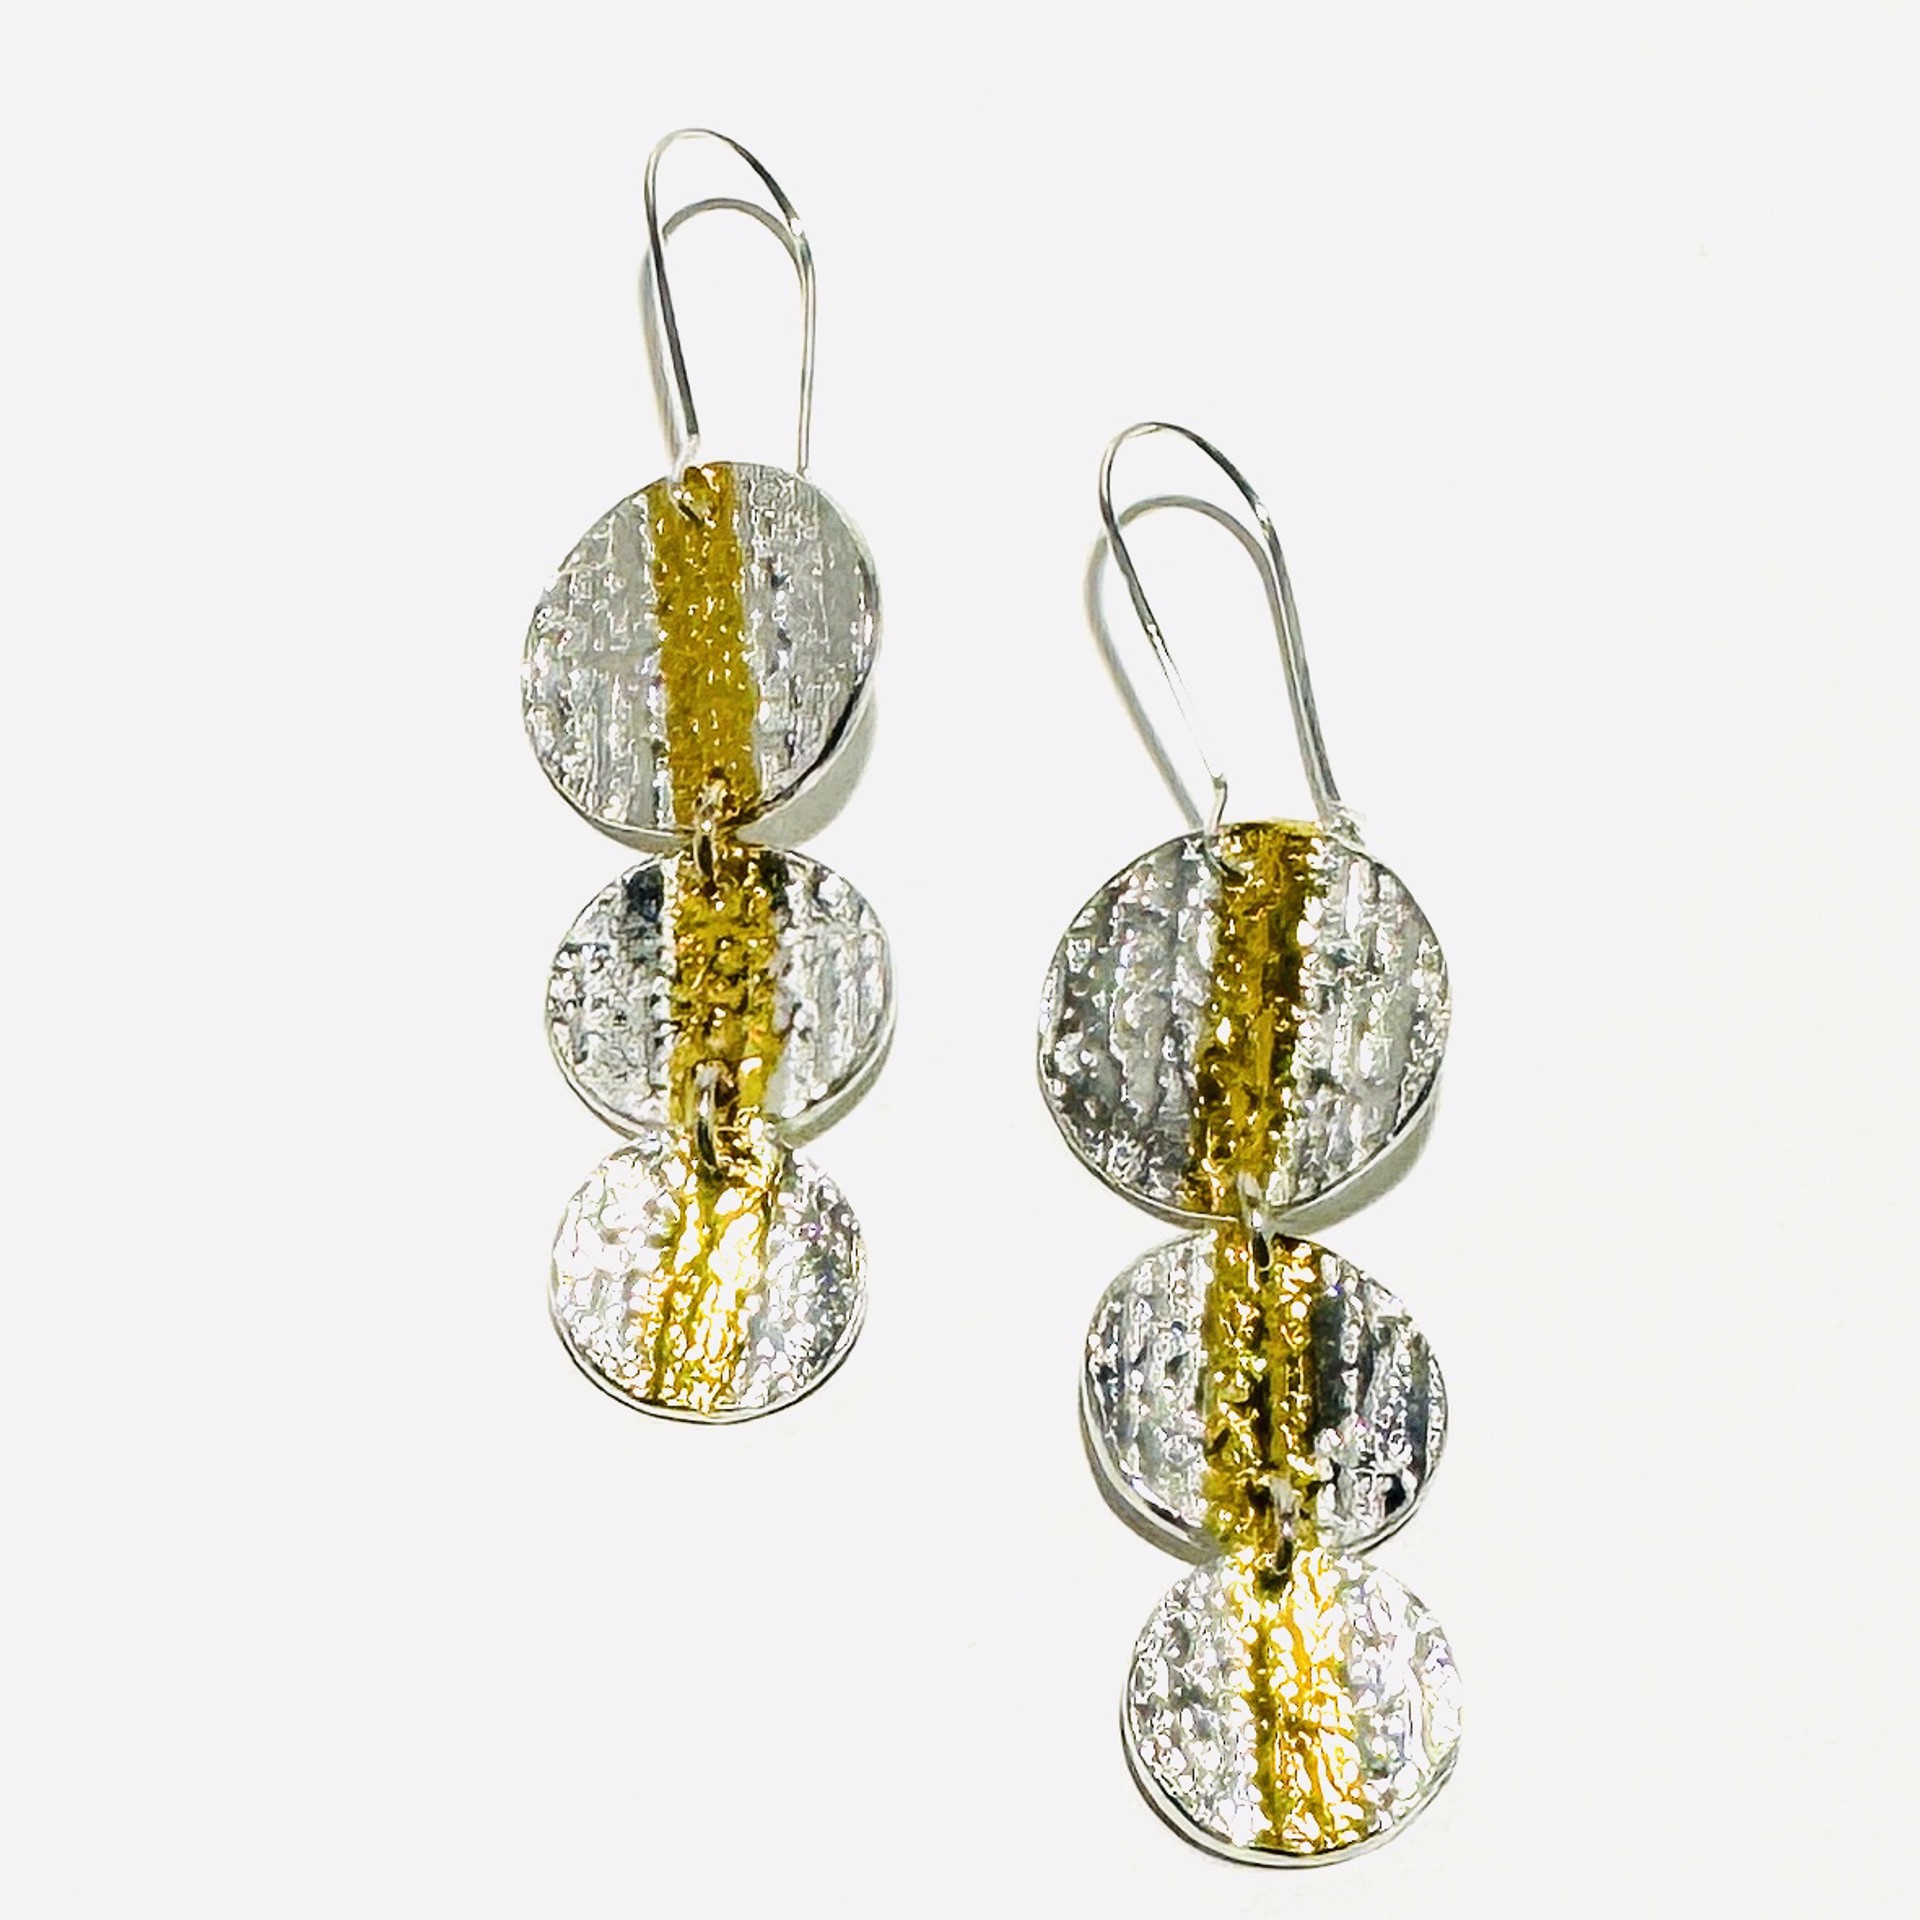 Keum-boo Fine Silver and Gold Circle Trio Earrings KH23-21 by Karen Hakim